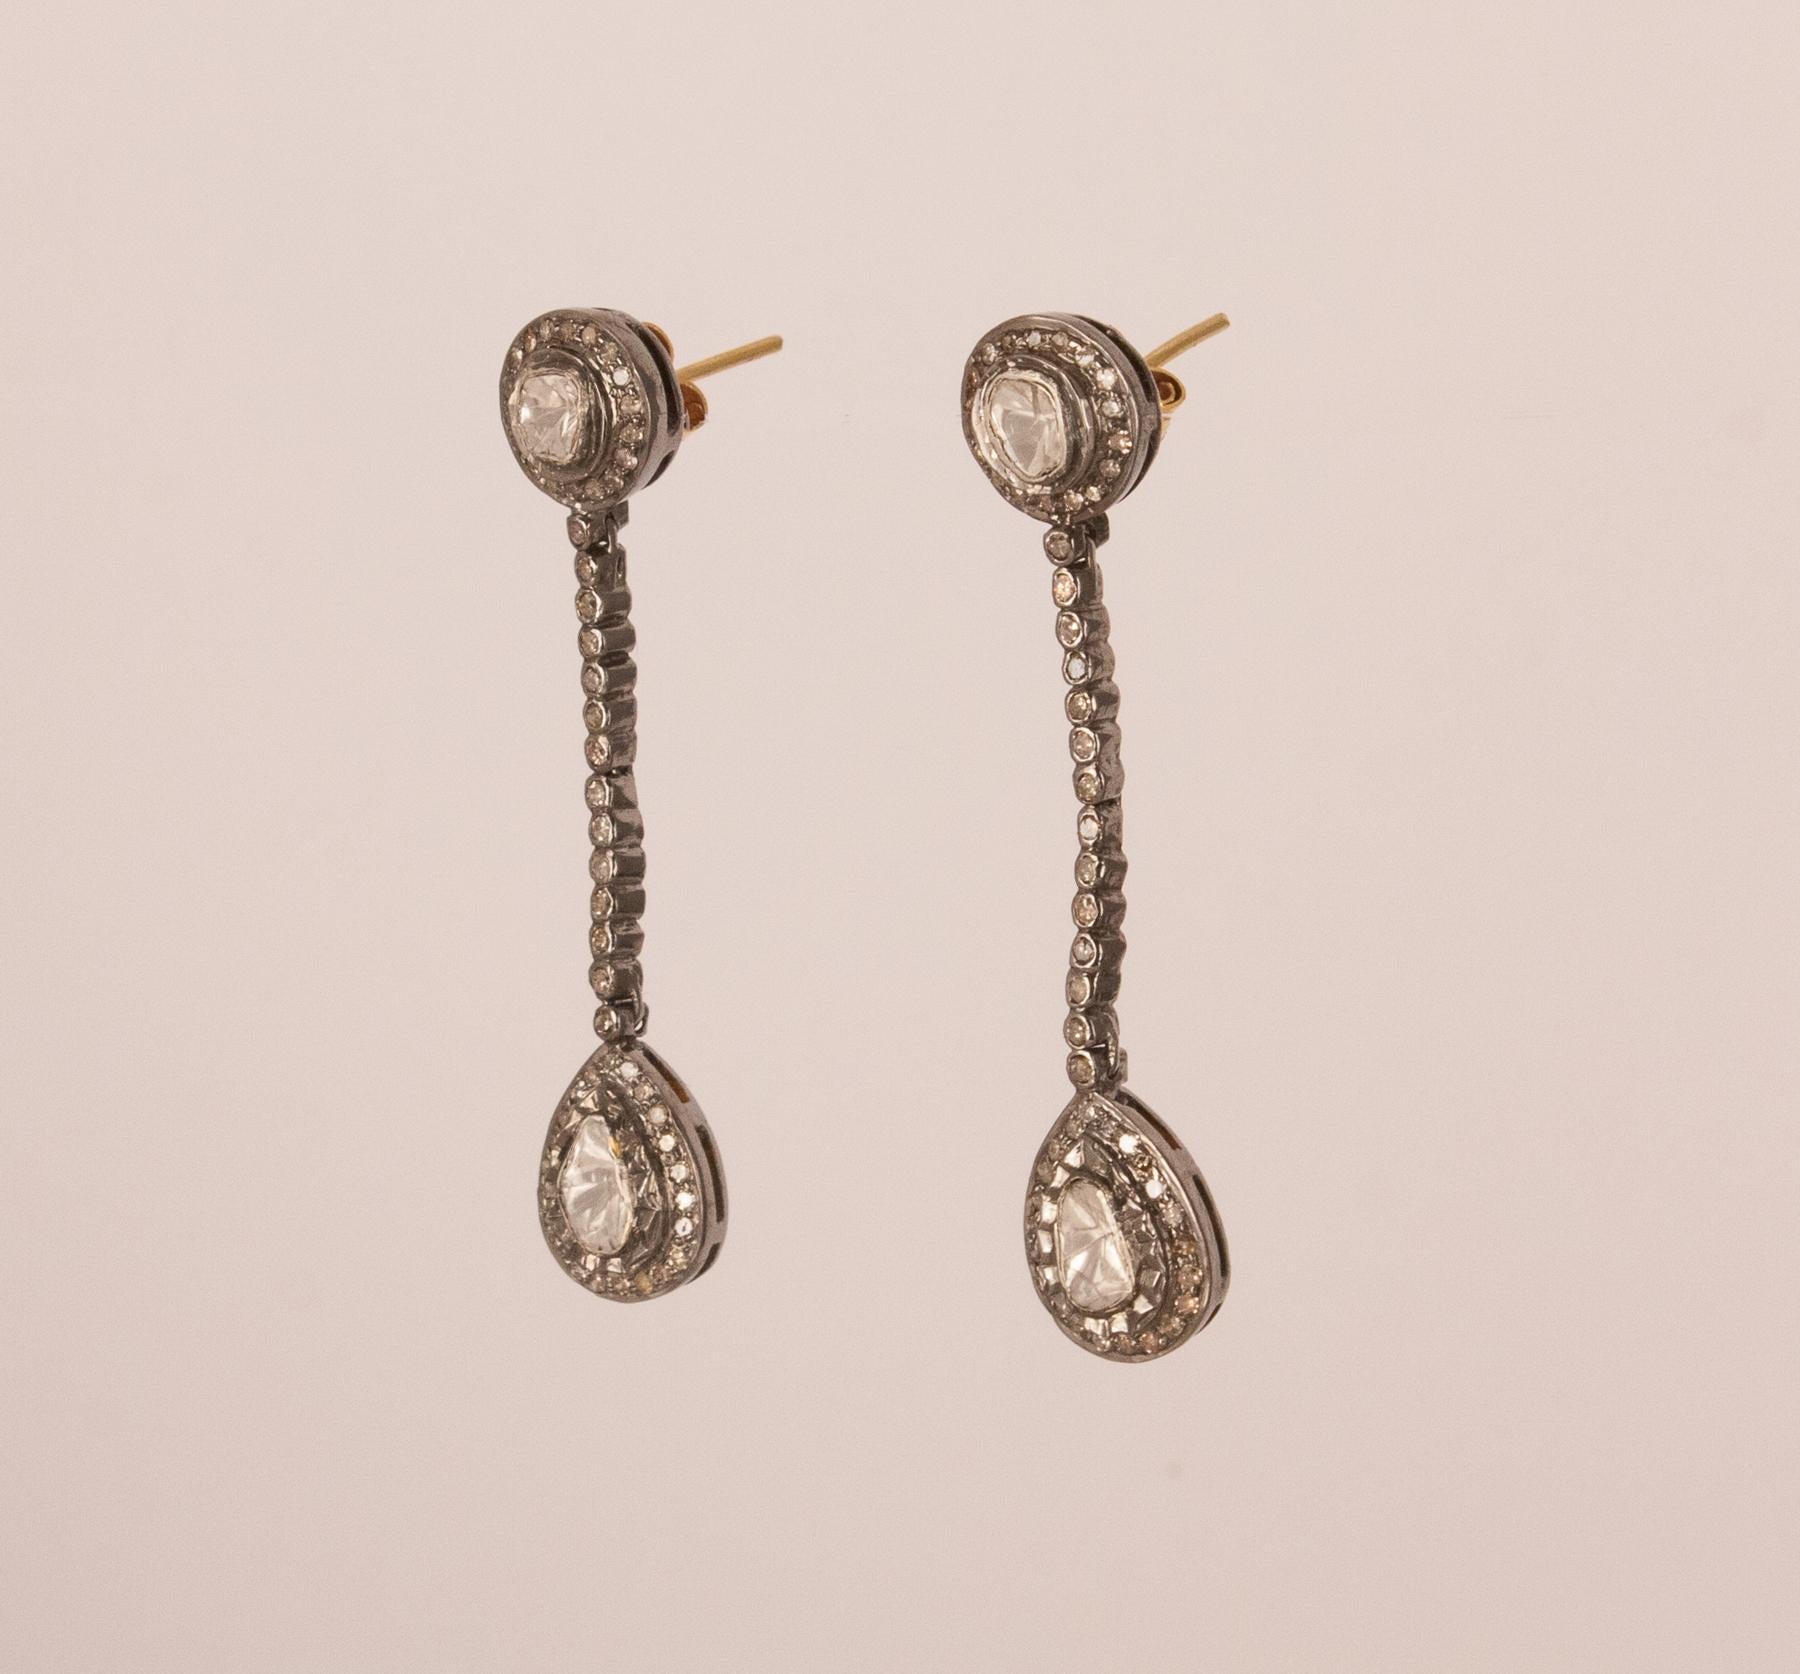 These rose cut diamond dangle earrings feature larger, asymmetrical Polki diamonds encircled by diamonds pave set in sterling silver and joined by a strand of smaller diamonds. Set in this traditional Indian style, the earrings are at once elegant